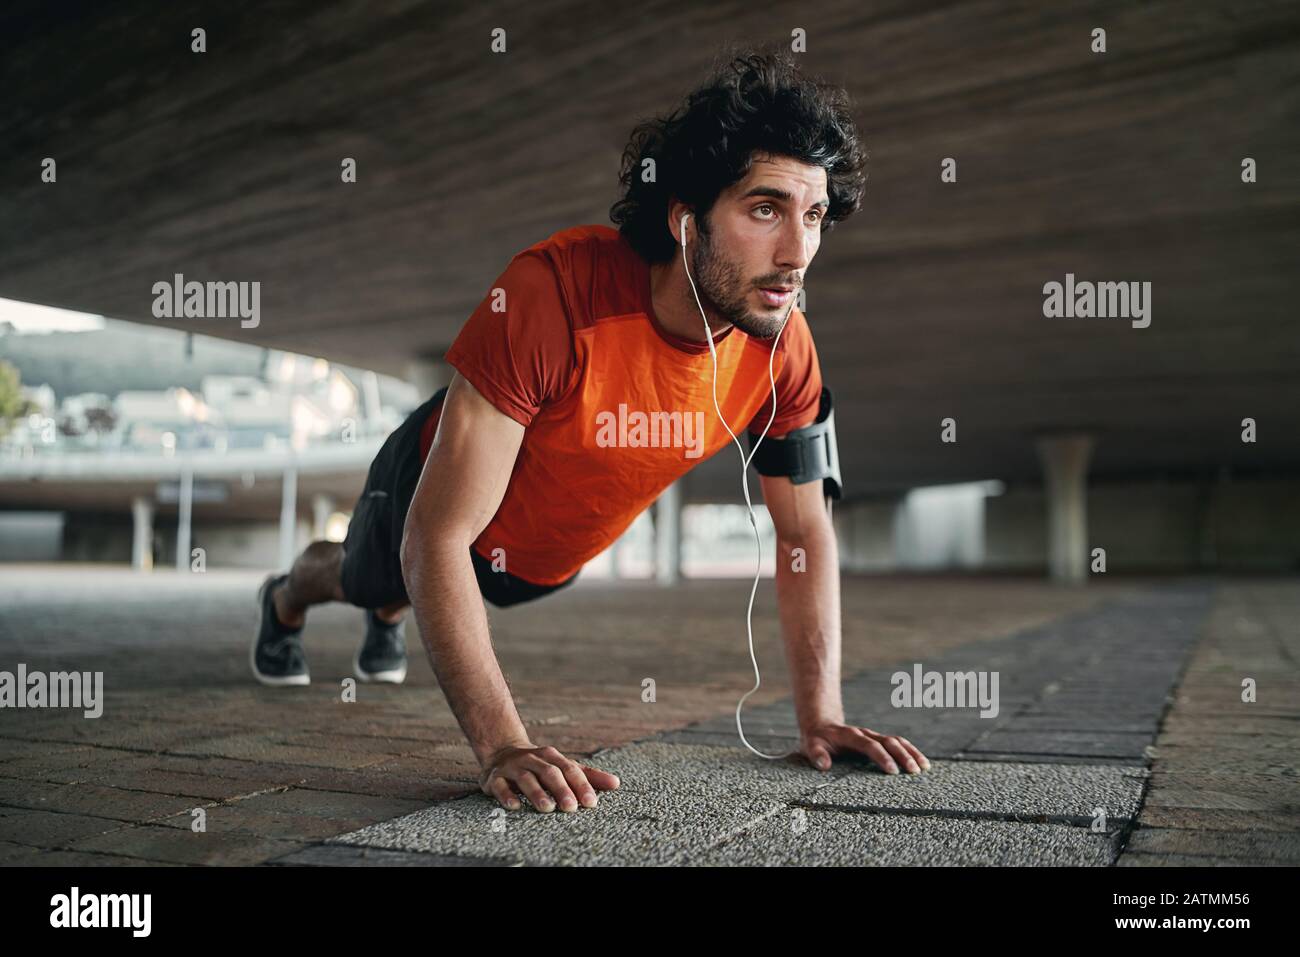 Attractive fit man listening to music in earphone doing push-ups exercises during workout outdoors - man showing perseverance and determination Stock Photo